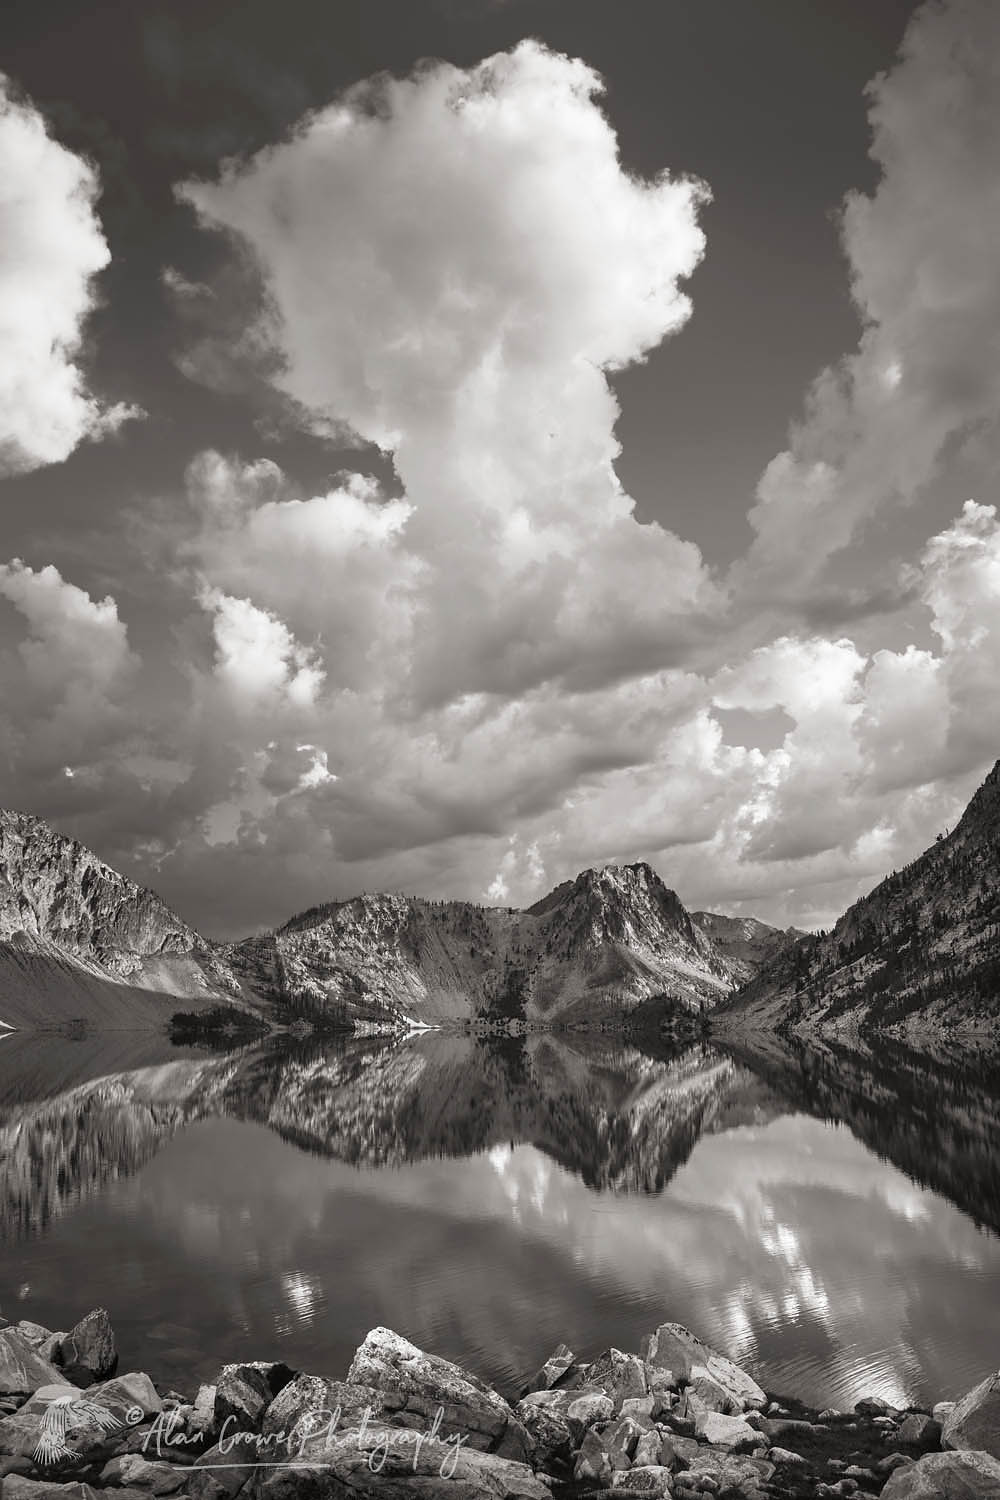 Morning clouds mirrored in still waters of Sawtooth Lake. Sawtooth Mountains Wilderness Idaho #65974bw